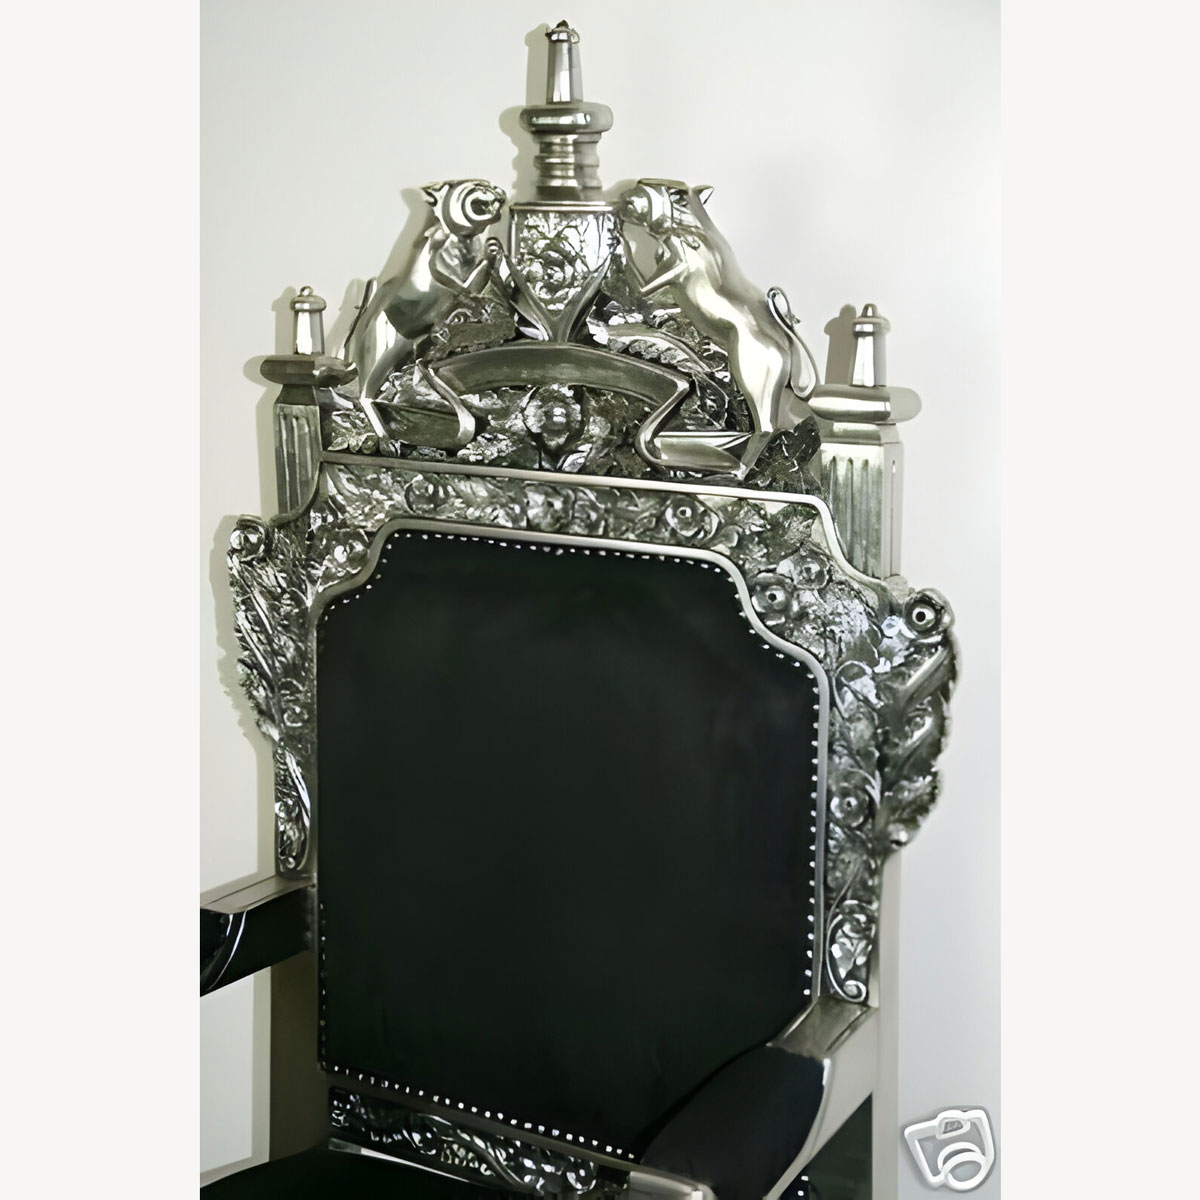 Tudor Royal Throne Chair In Silver And Black 4 - Hampshire Barn Interiors - Tudor Royal Throne Chair In Silver And Black -